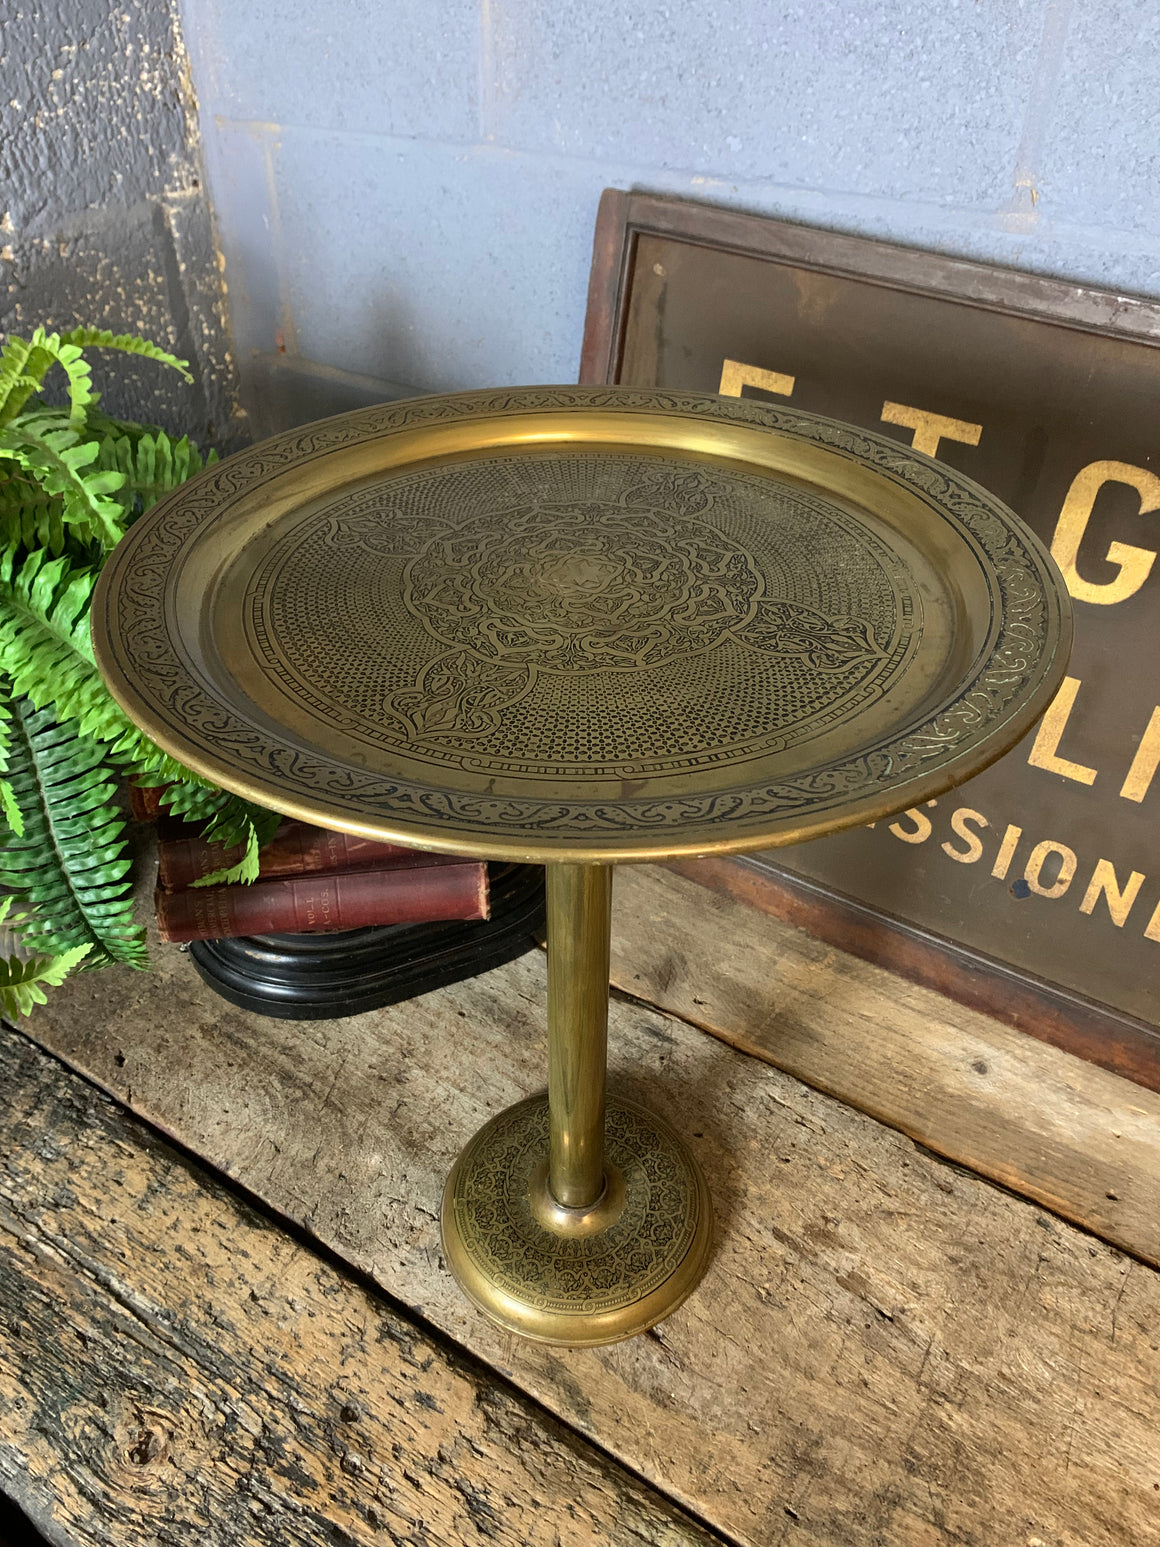 An ornate brass Anglo-Indian pedestal table